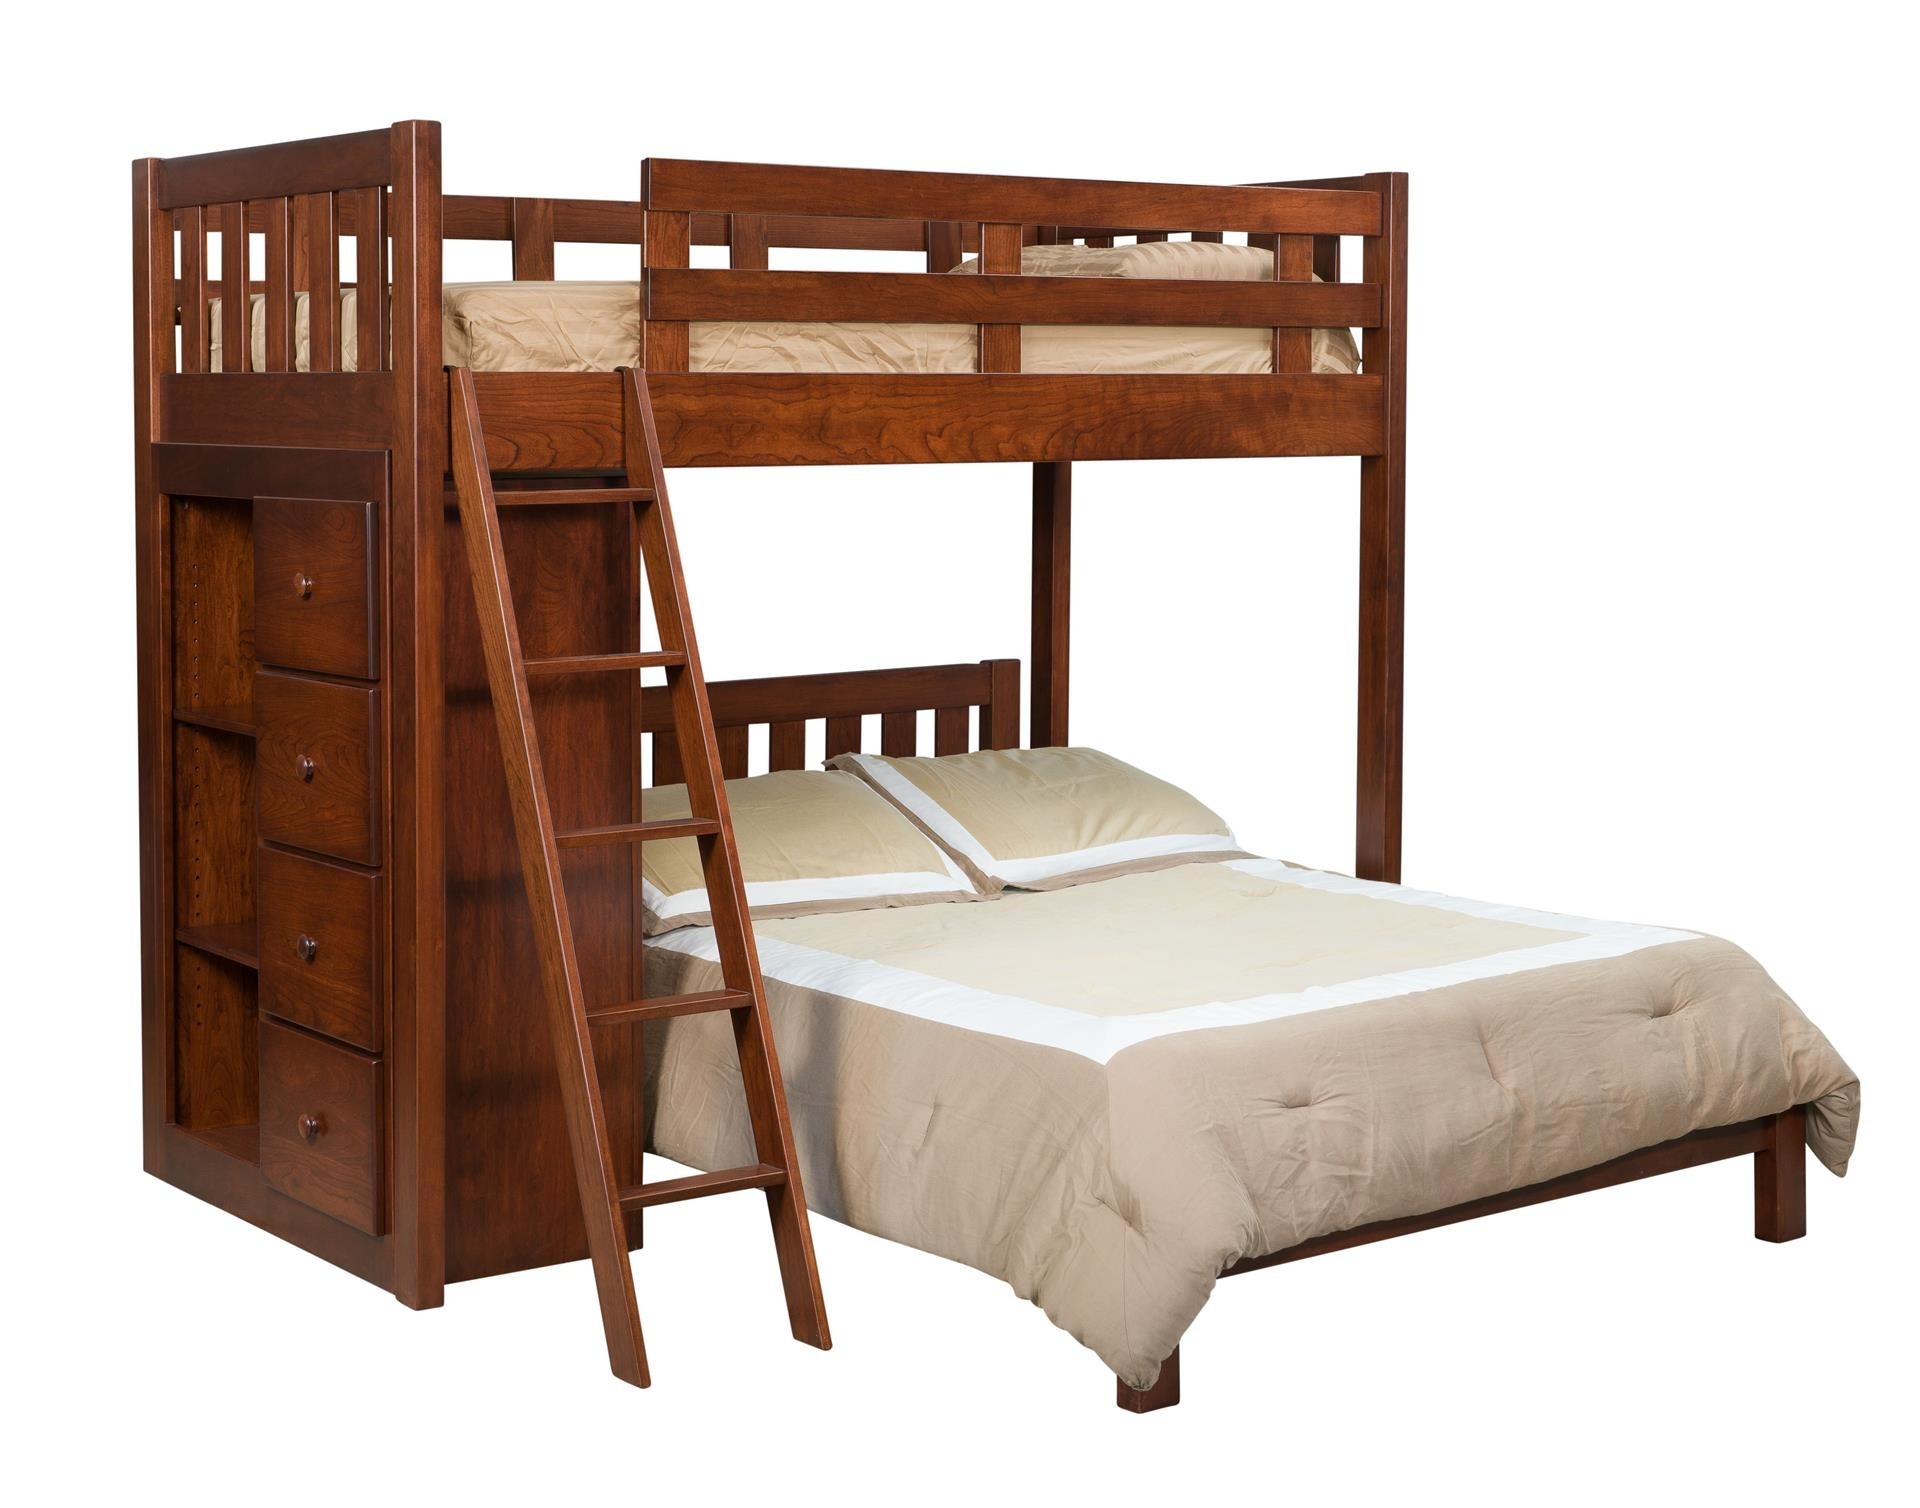 Kids bunk bed with bookcase from dutchcrafters amish furniture